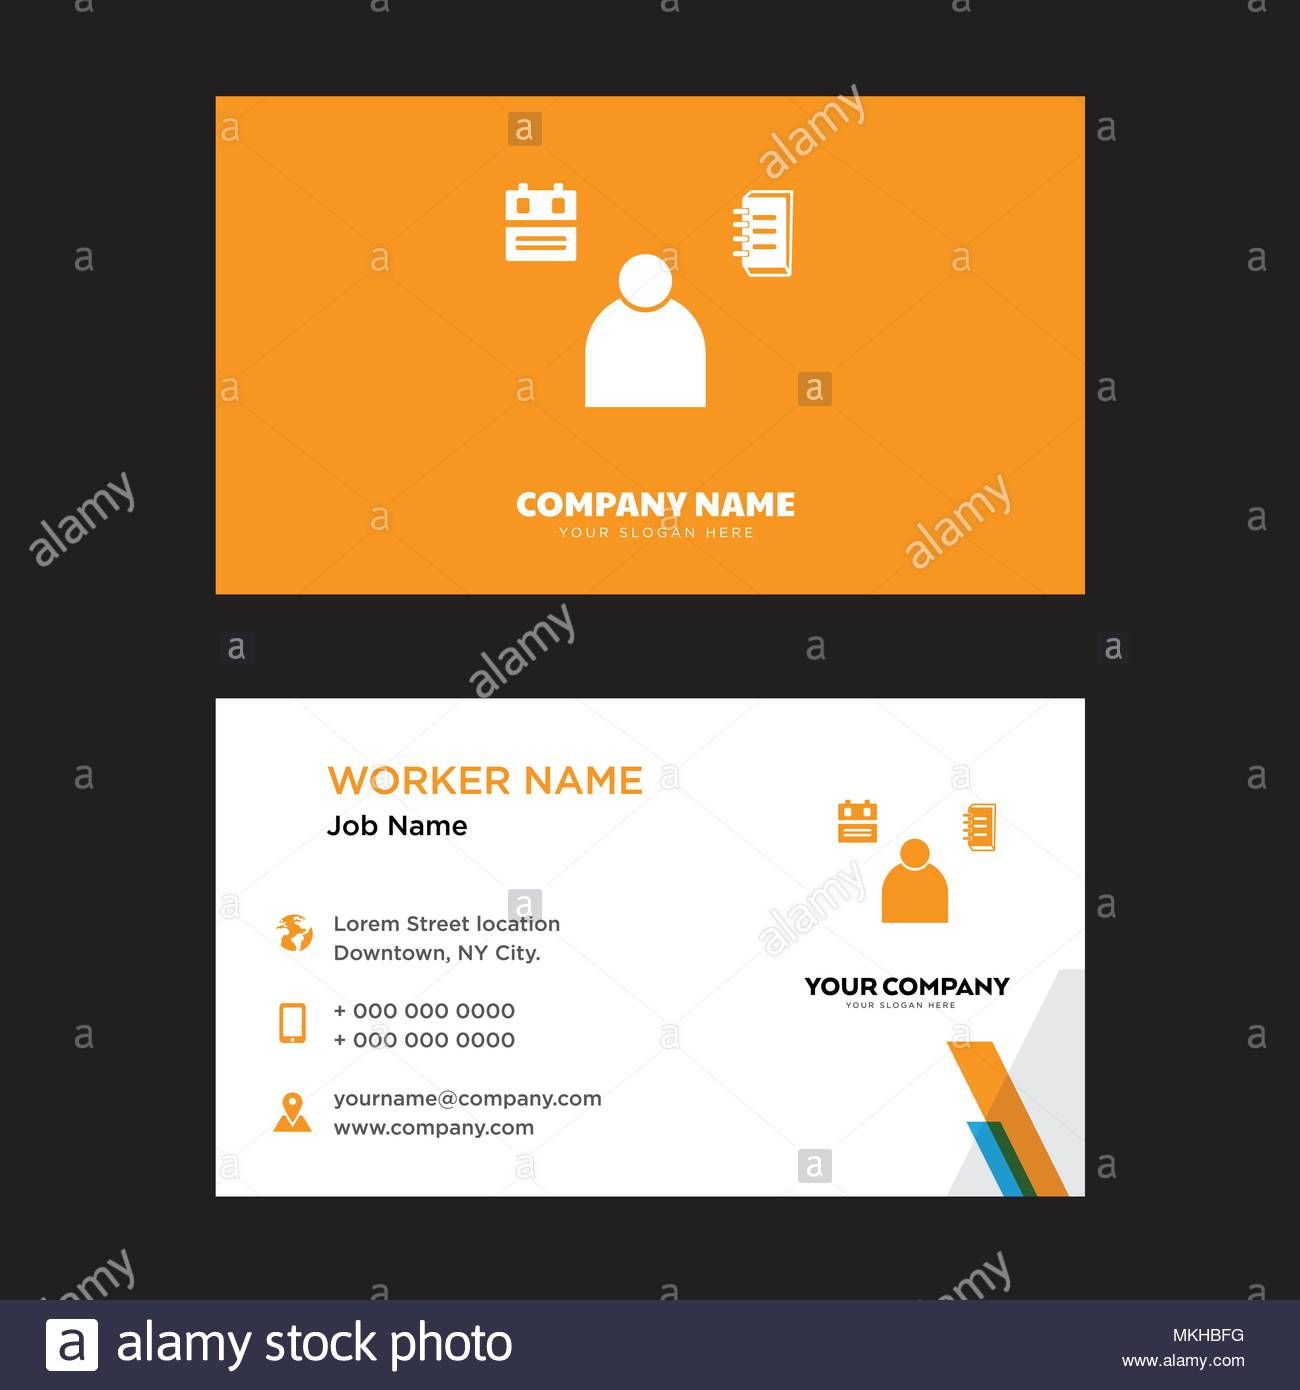 Student Business Card Design Template, Visiting For Your Throughout Student Business Card Template